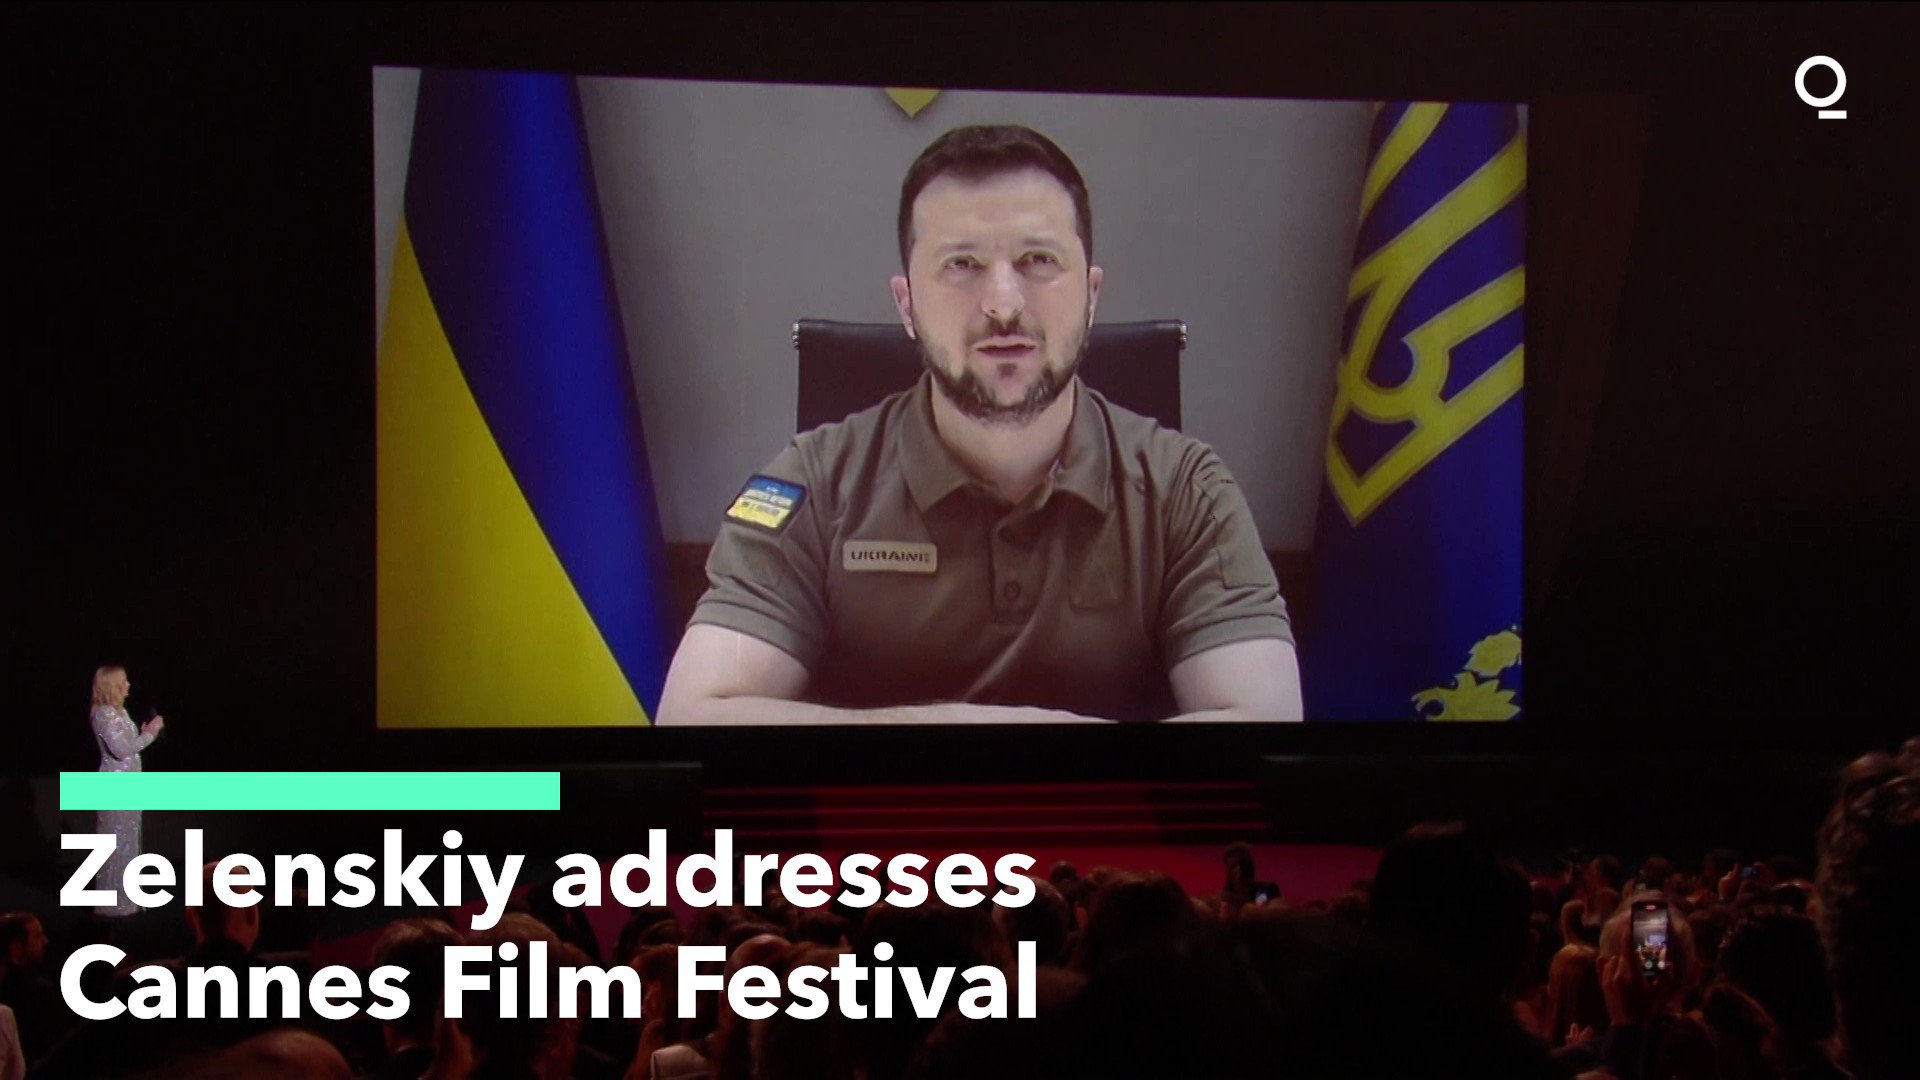 @Quicktake: “We need a new Chaplin who will demonstrate that the cinema of our time is not silent.”Ukraine’s president Zelenskiy opened #CannesFilmFestival2022, calling on a new generation of filmmakers to confront dictators as Charlie Chaplin satirized Adolf Hitler